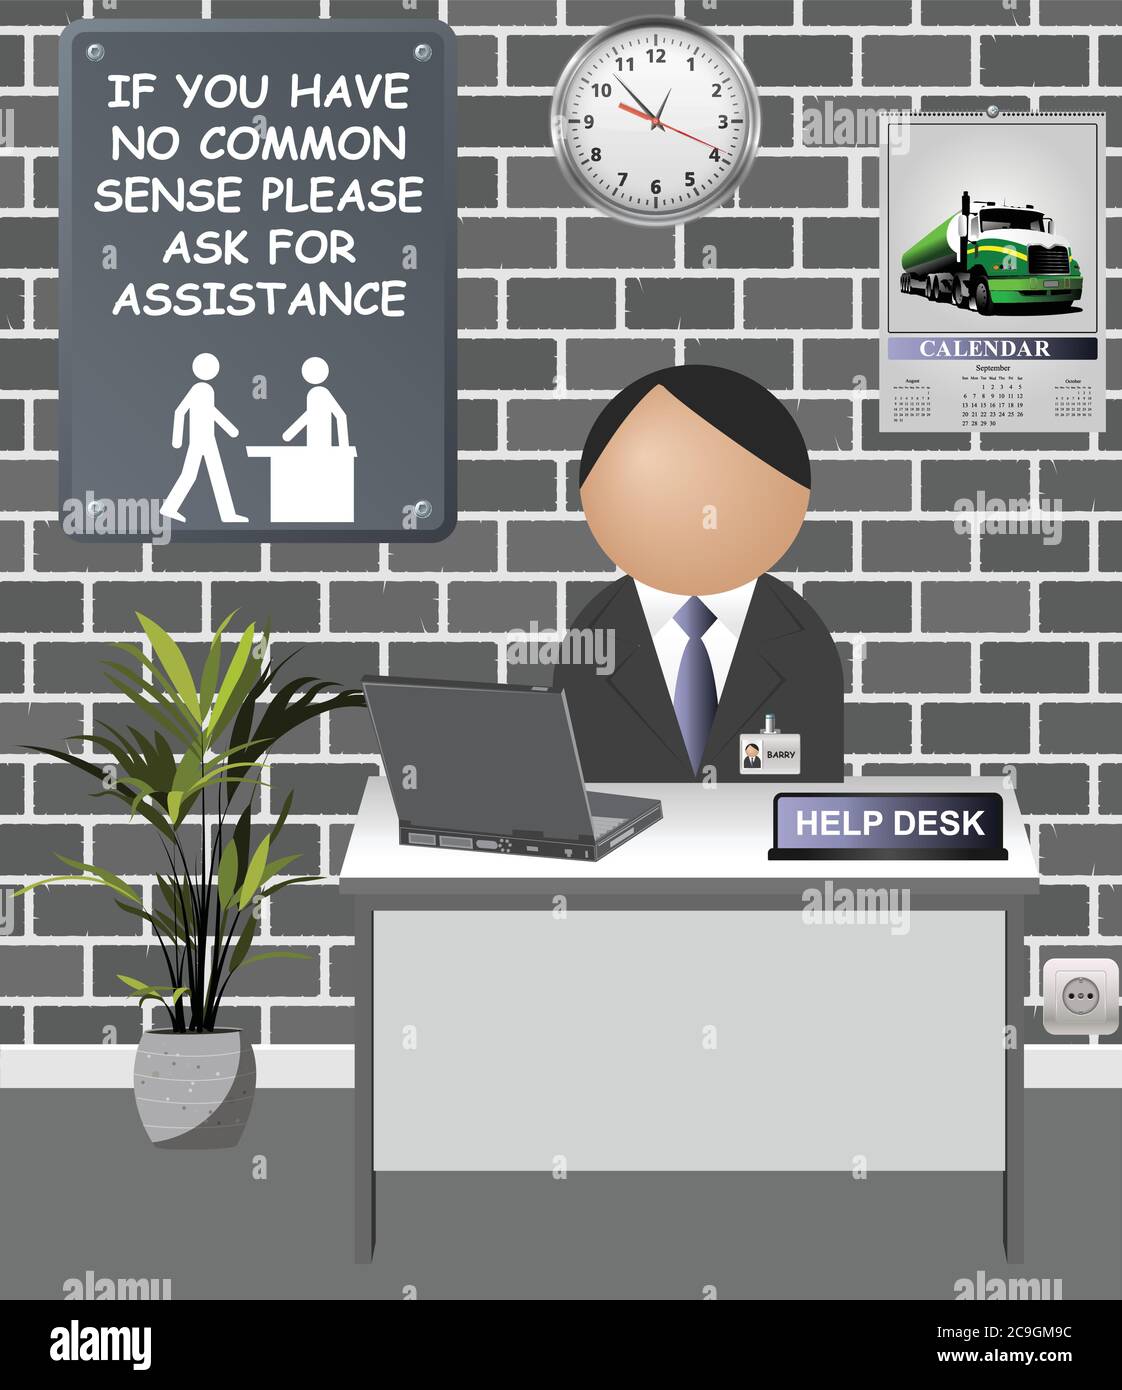 Comical male assistant at help desk for stupid people with no common sense Stock Vector